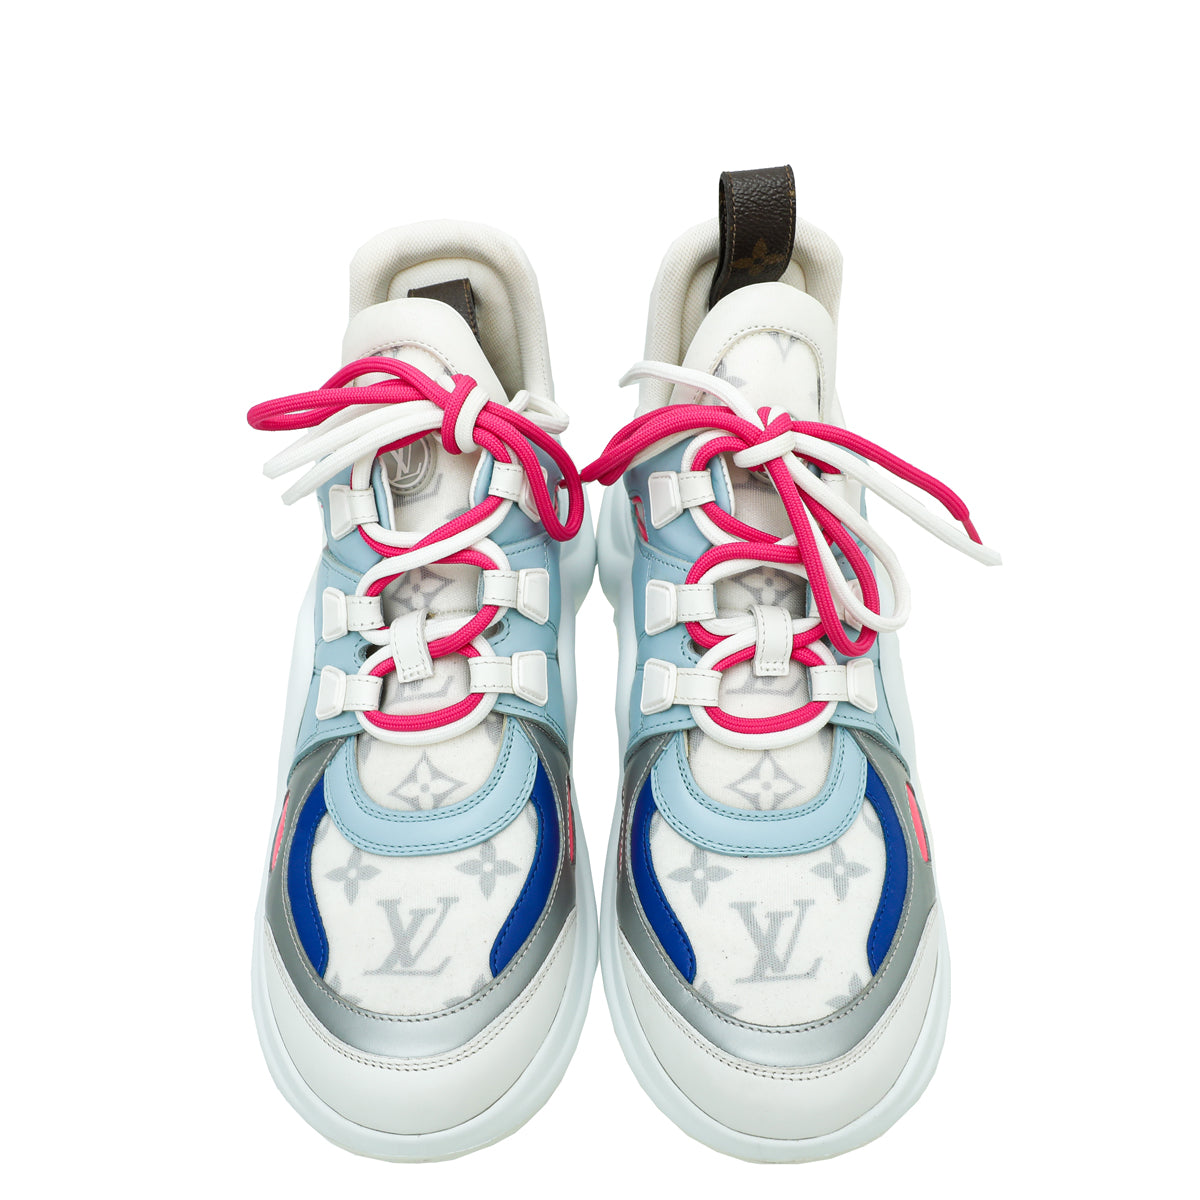 Louis Vuitton Multicolor Leather And Mesh Archlight Sneakers Size